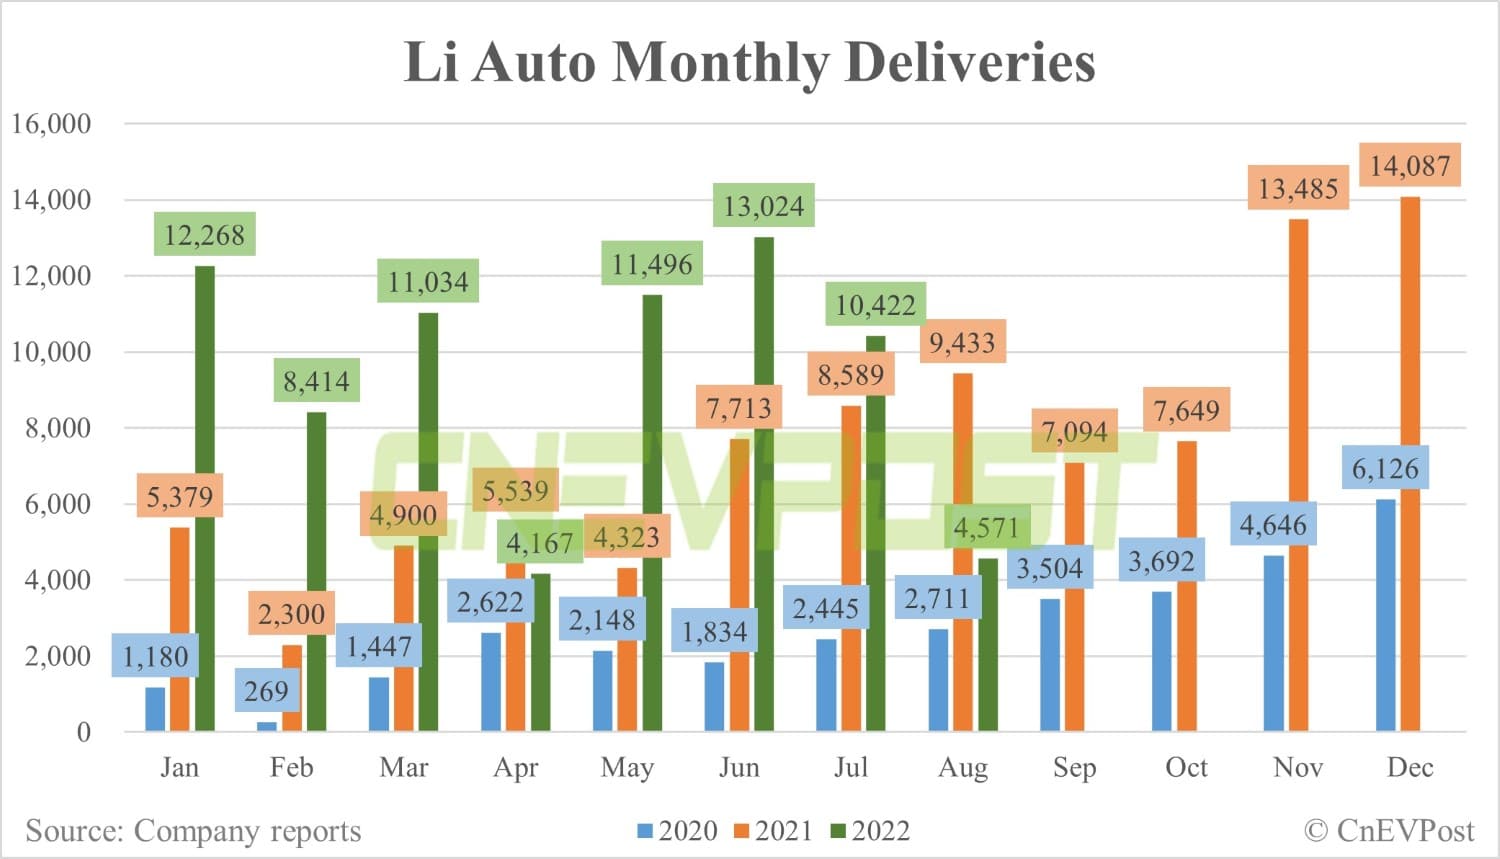 Li Auto deliveries fall to 4,571 units in Aug as new models may have held back potential consumers' plans-CnEVPost